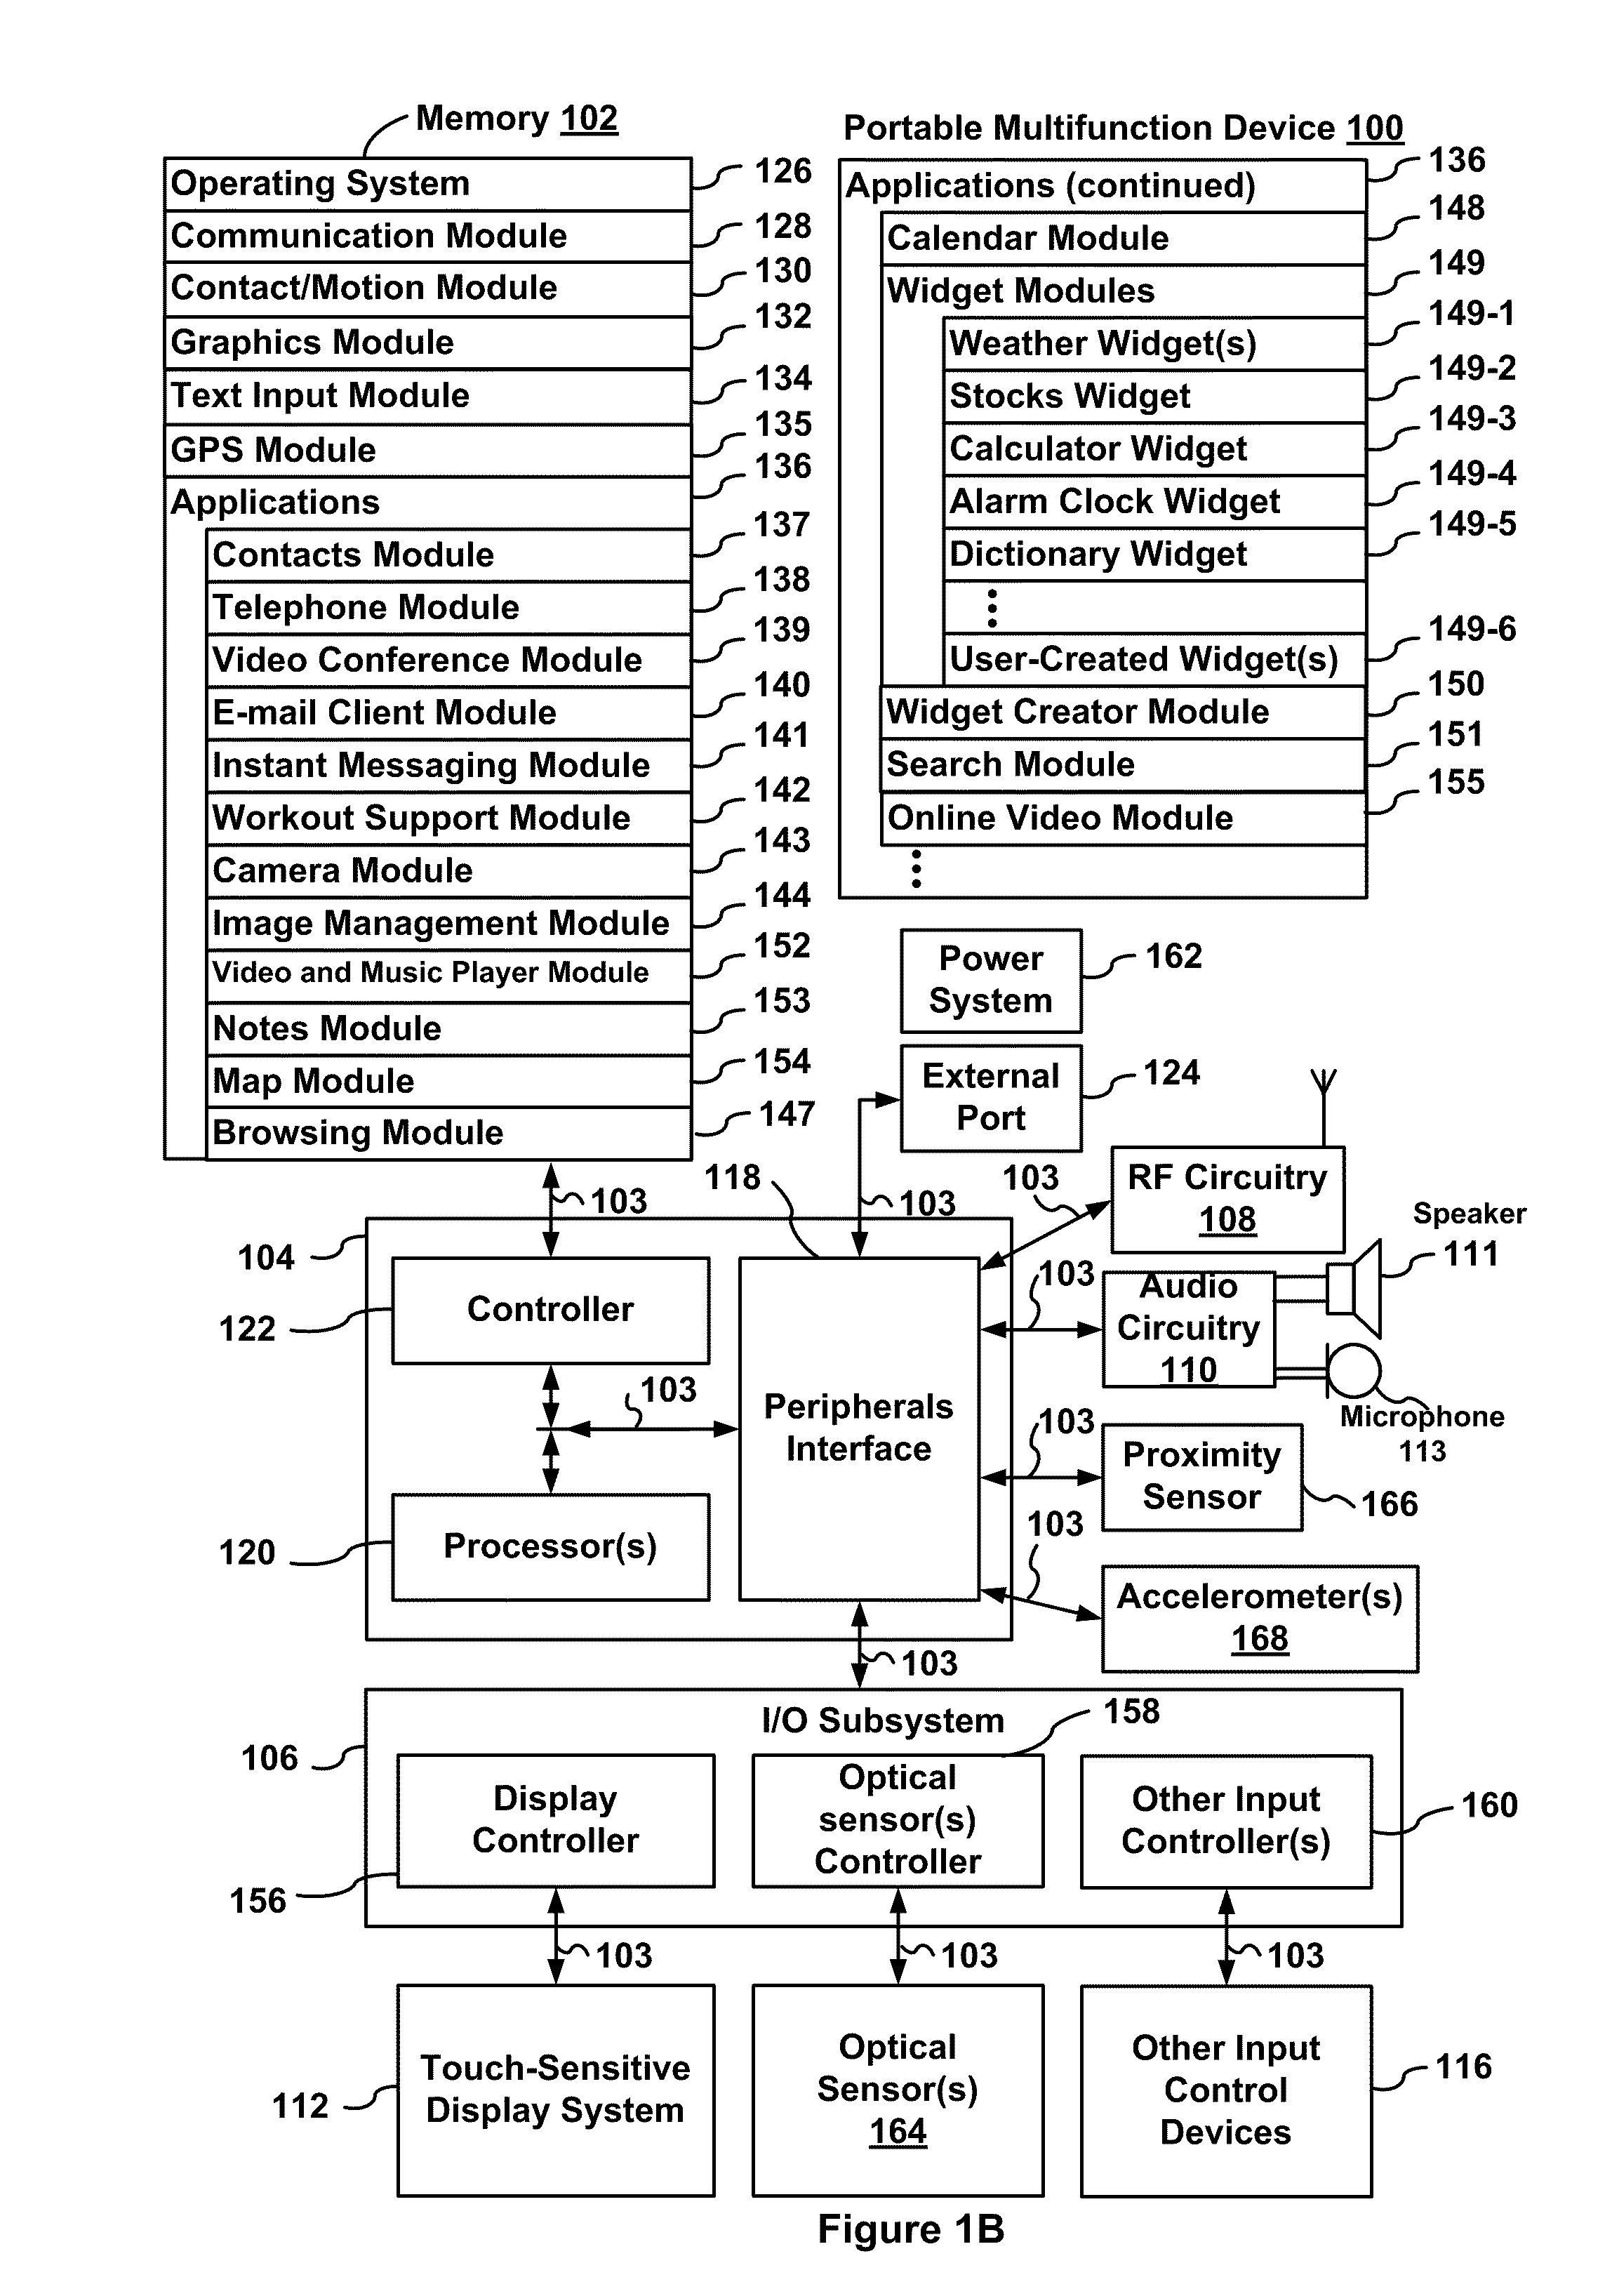 Smart keyboard management for a multifunction device with a touch screen display